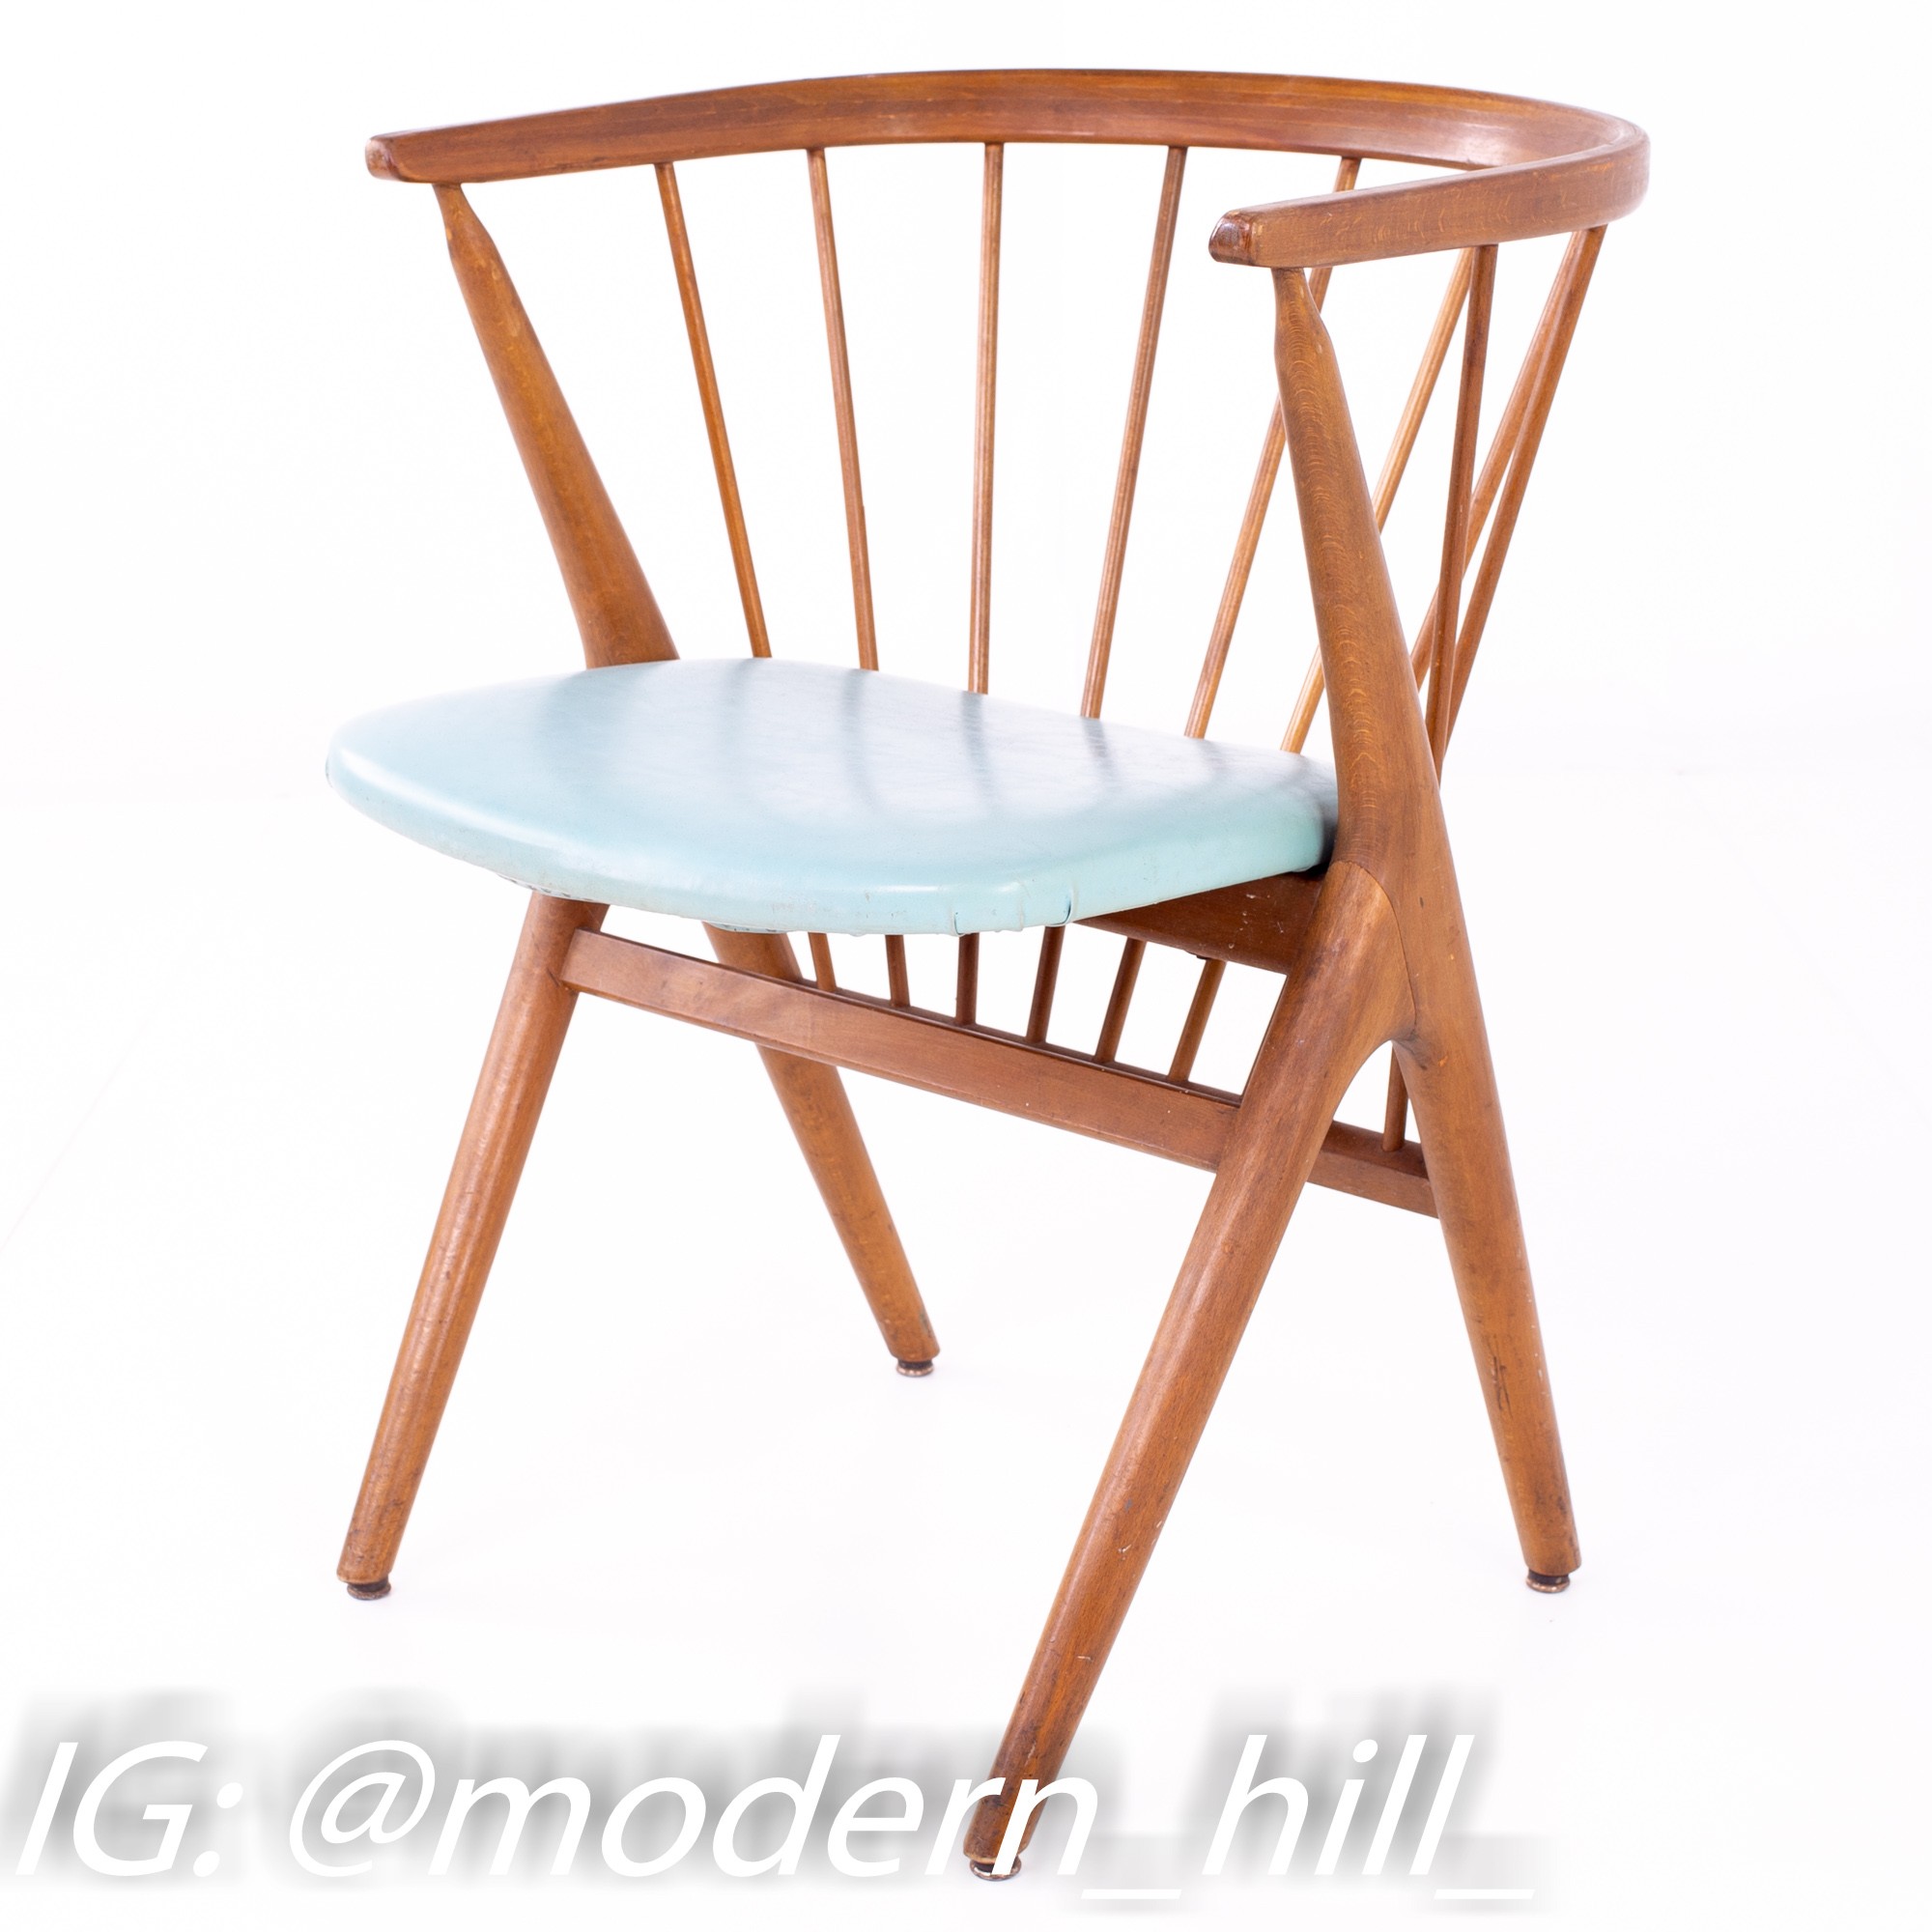 Helge Sibast George Tanier Selection for Sibast Møbler No. 8 Teak Dining Chairs - Set of 4